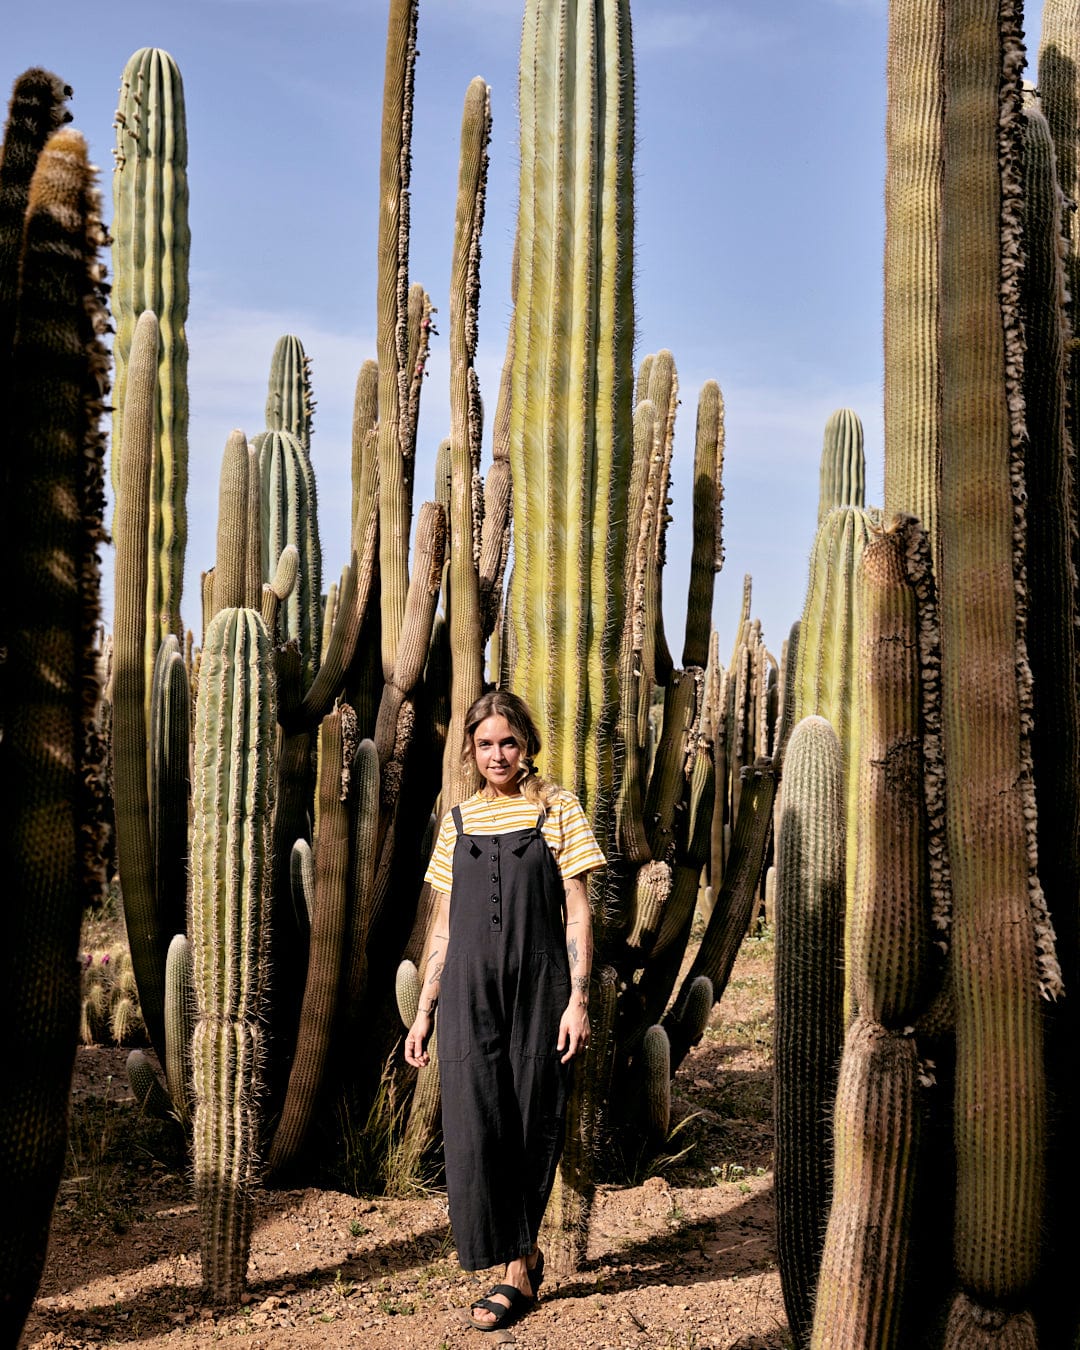 Person wearing a yellow striped shirt and Saltrock's Nancy - Womens Dungarees - Dark Grey stands amidst tall cacti in a desert landscape.